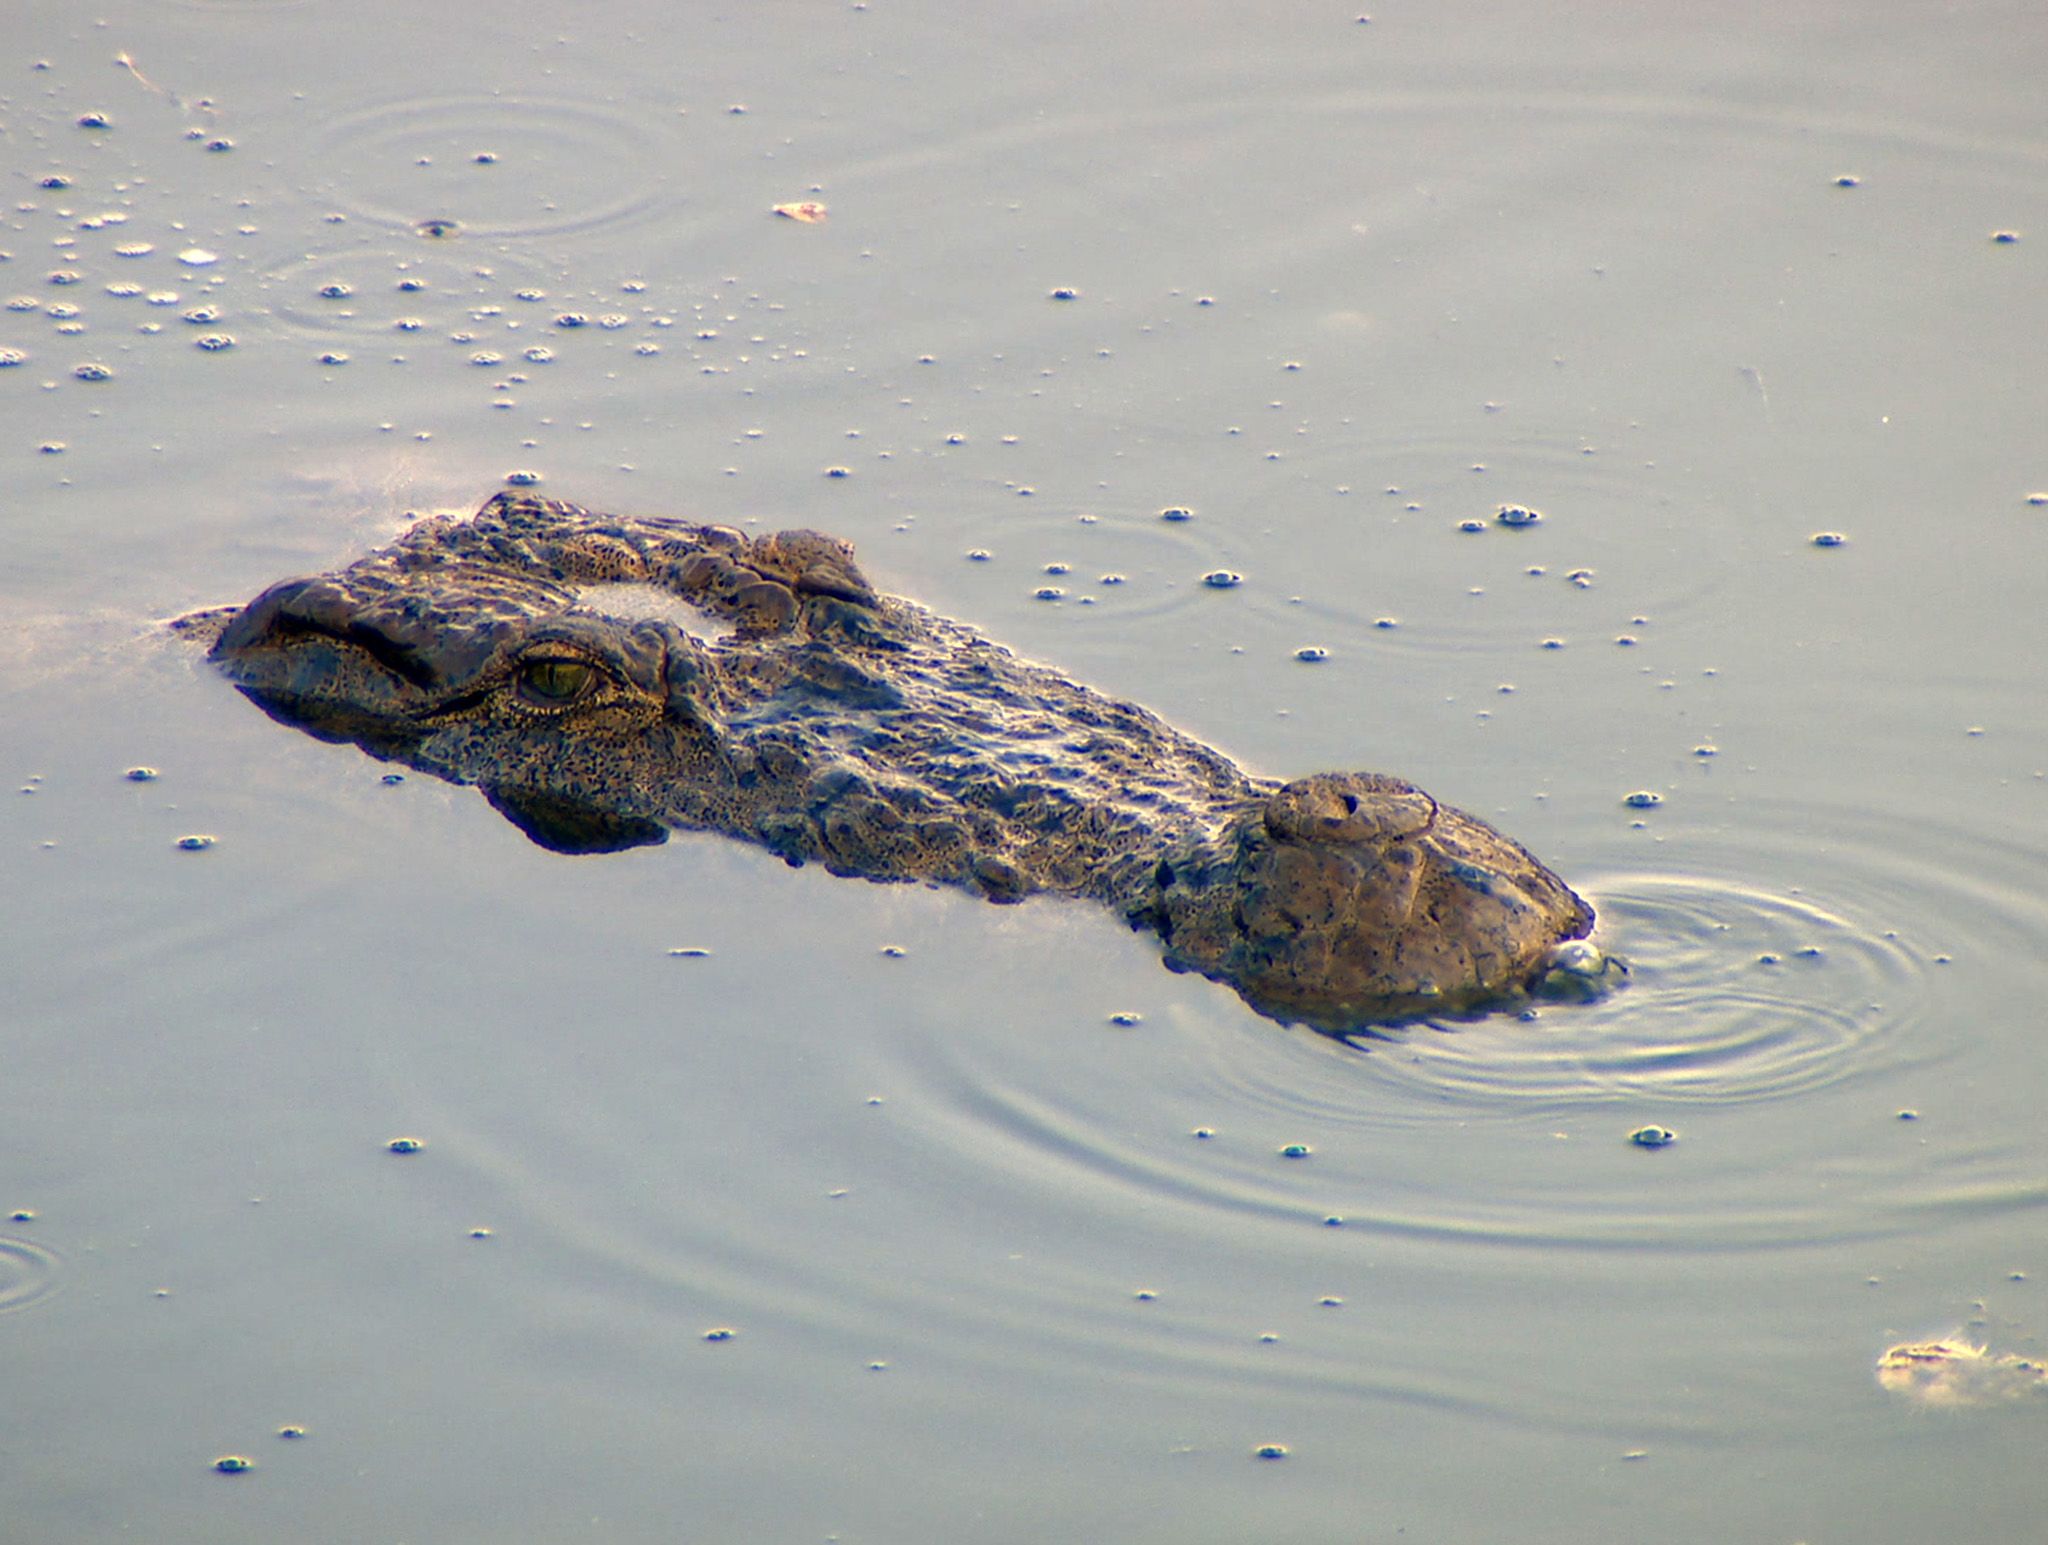 A crocodile submerged in the water with only his head showing.   This image is from Jungle Heroes. [Photo of the day - February 2020]